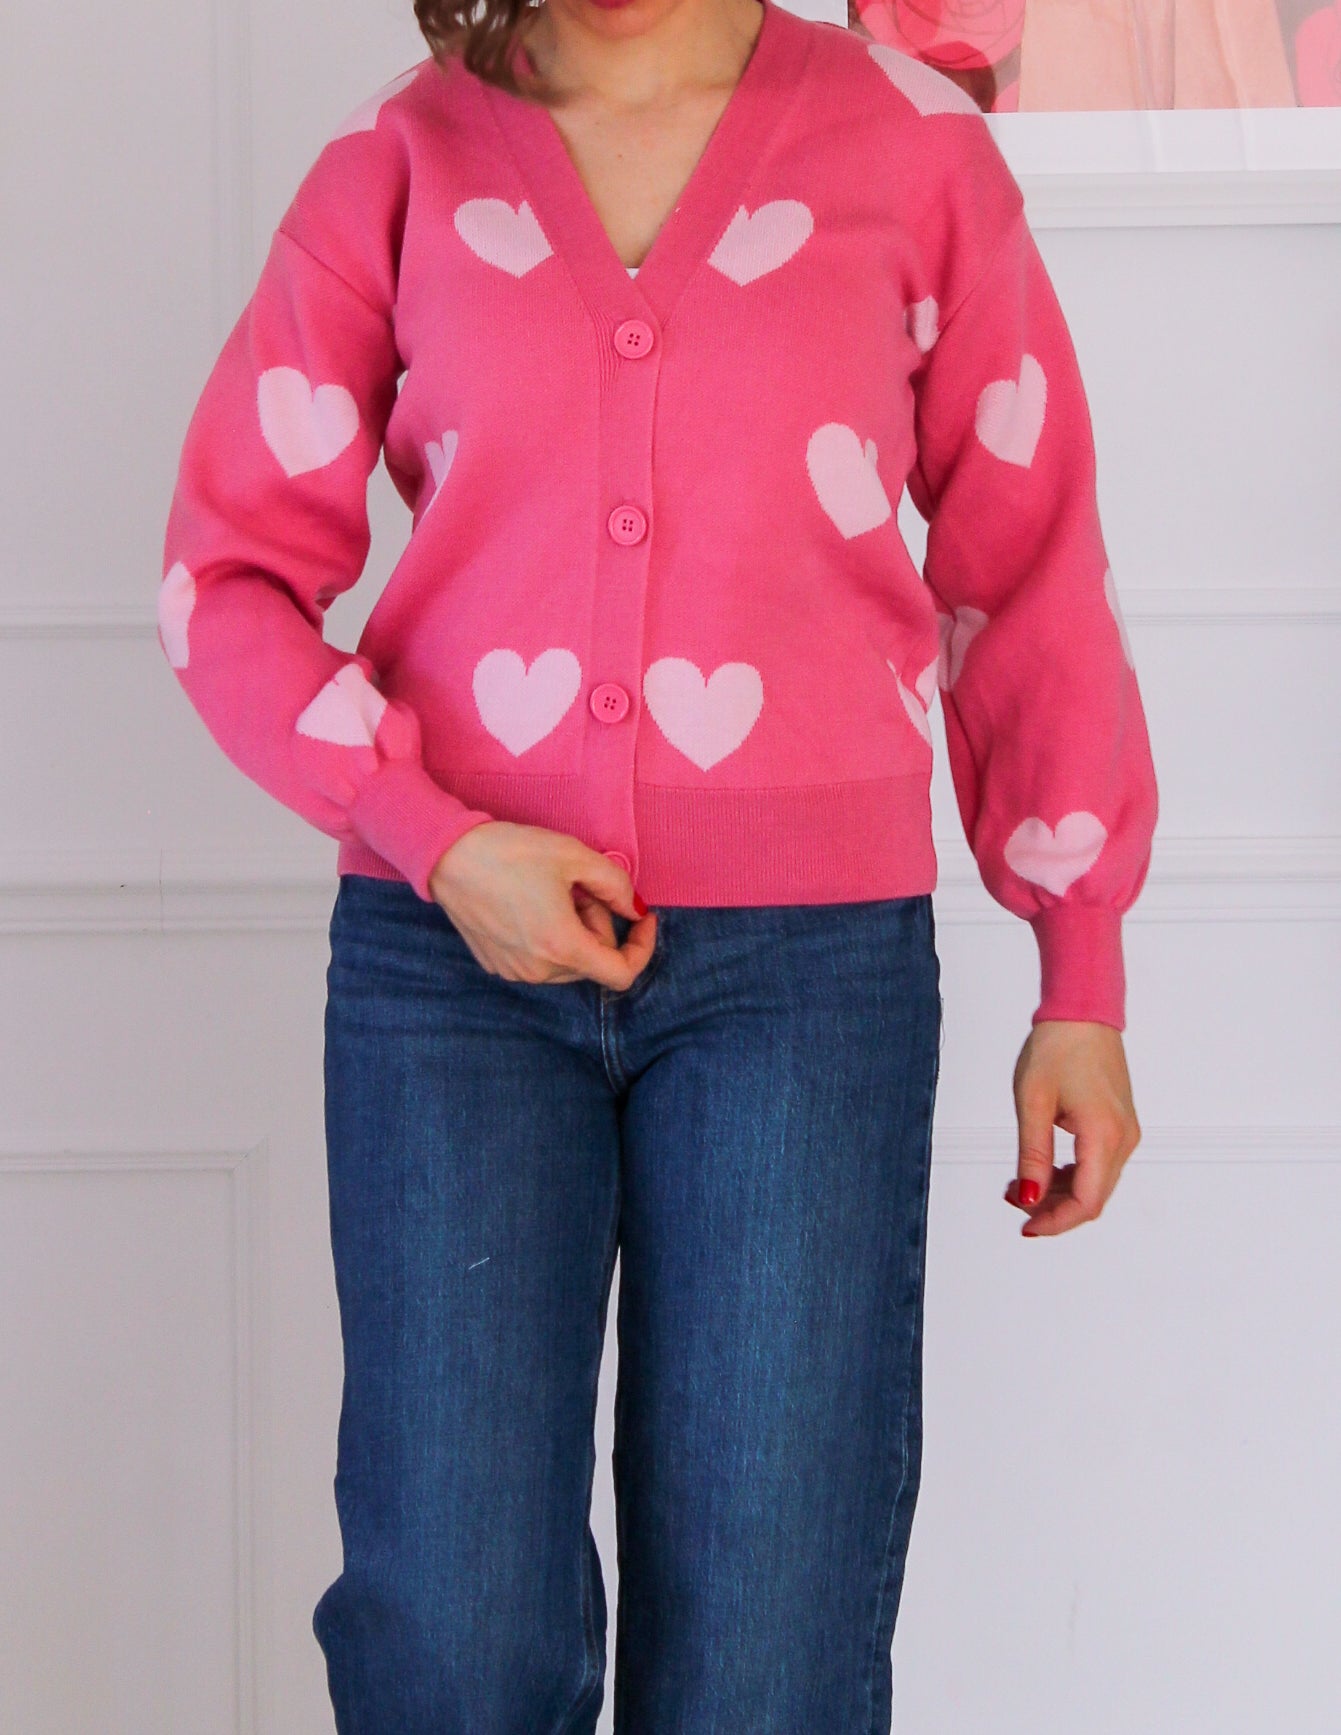 Short cardigan with powder pink heart patterns